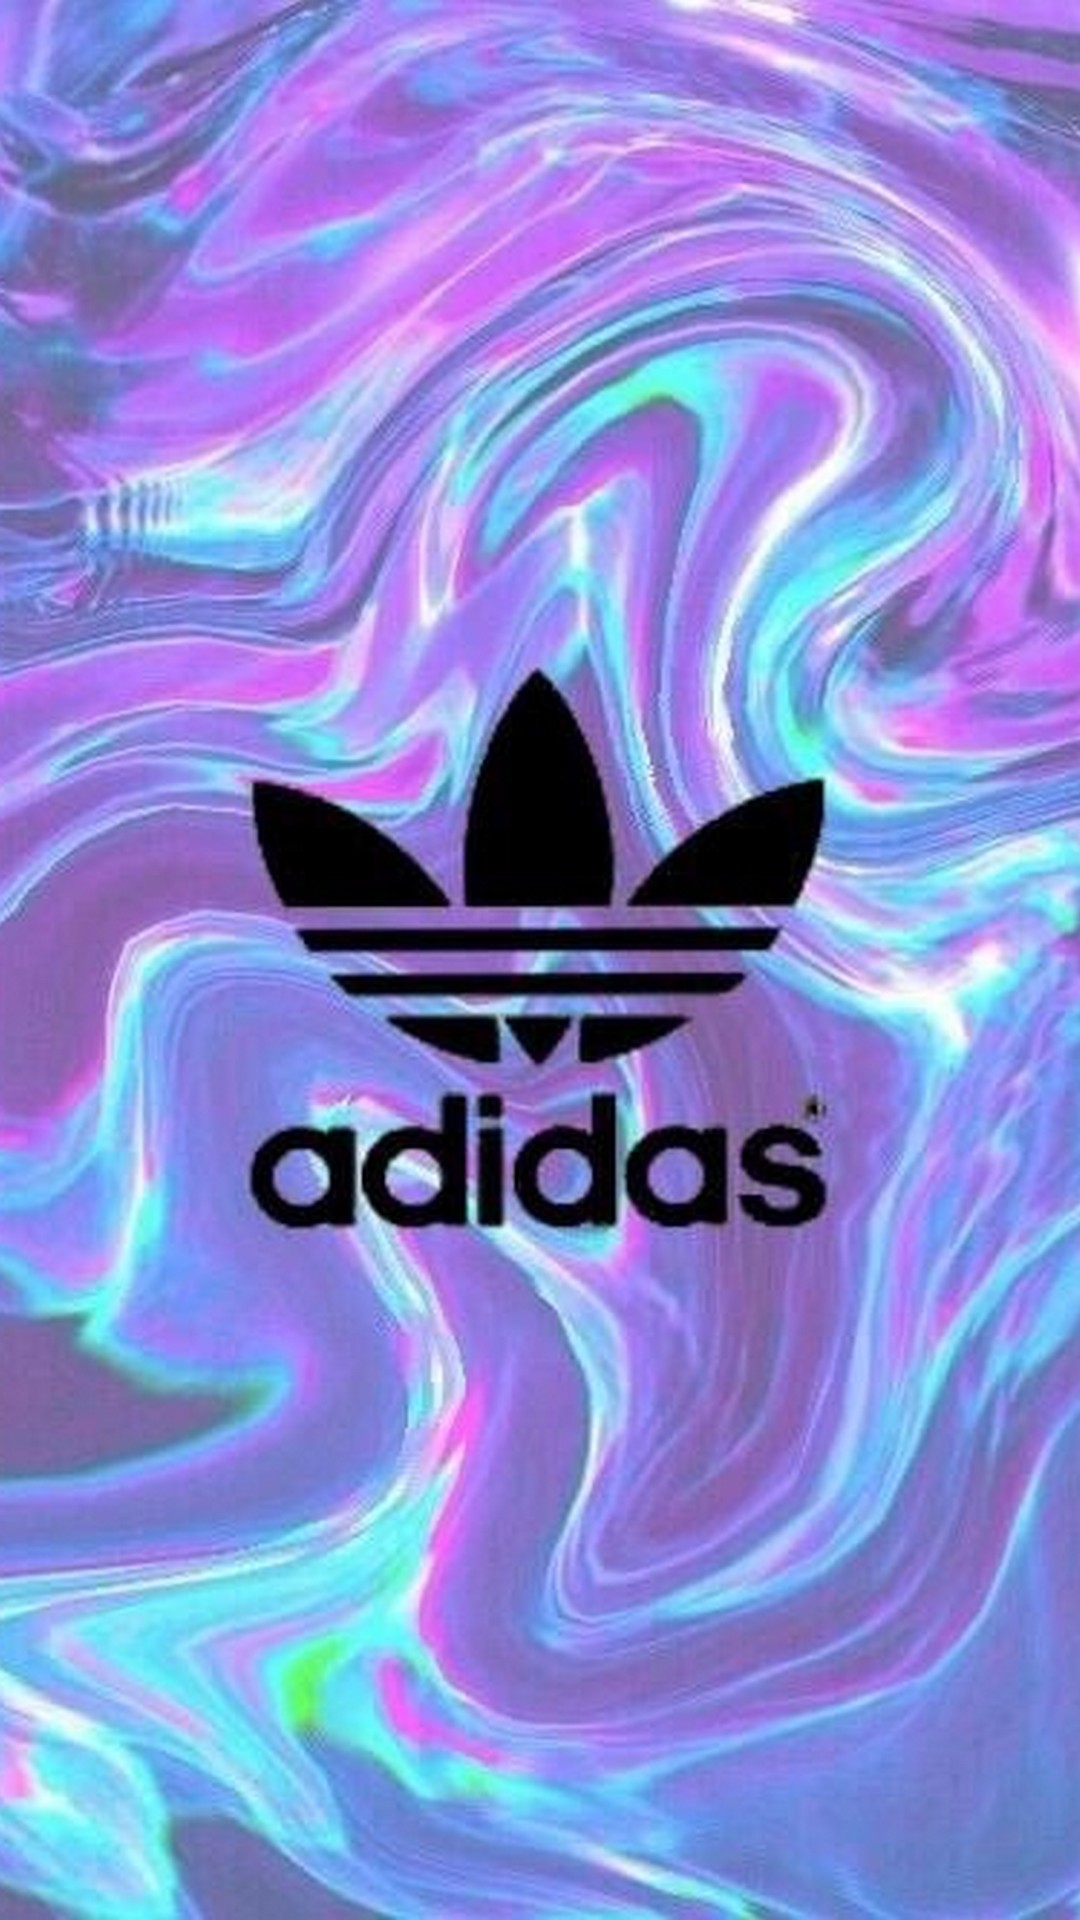 Blue Adidas Wallpapers - Top Free Blue Adidas Backgrounds - WallpaperAccess